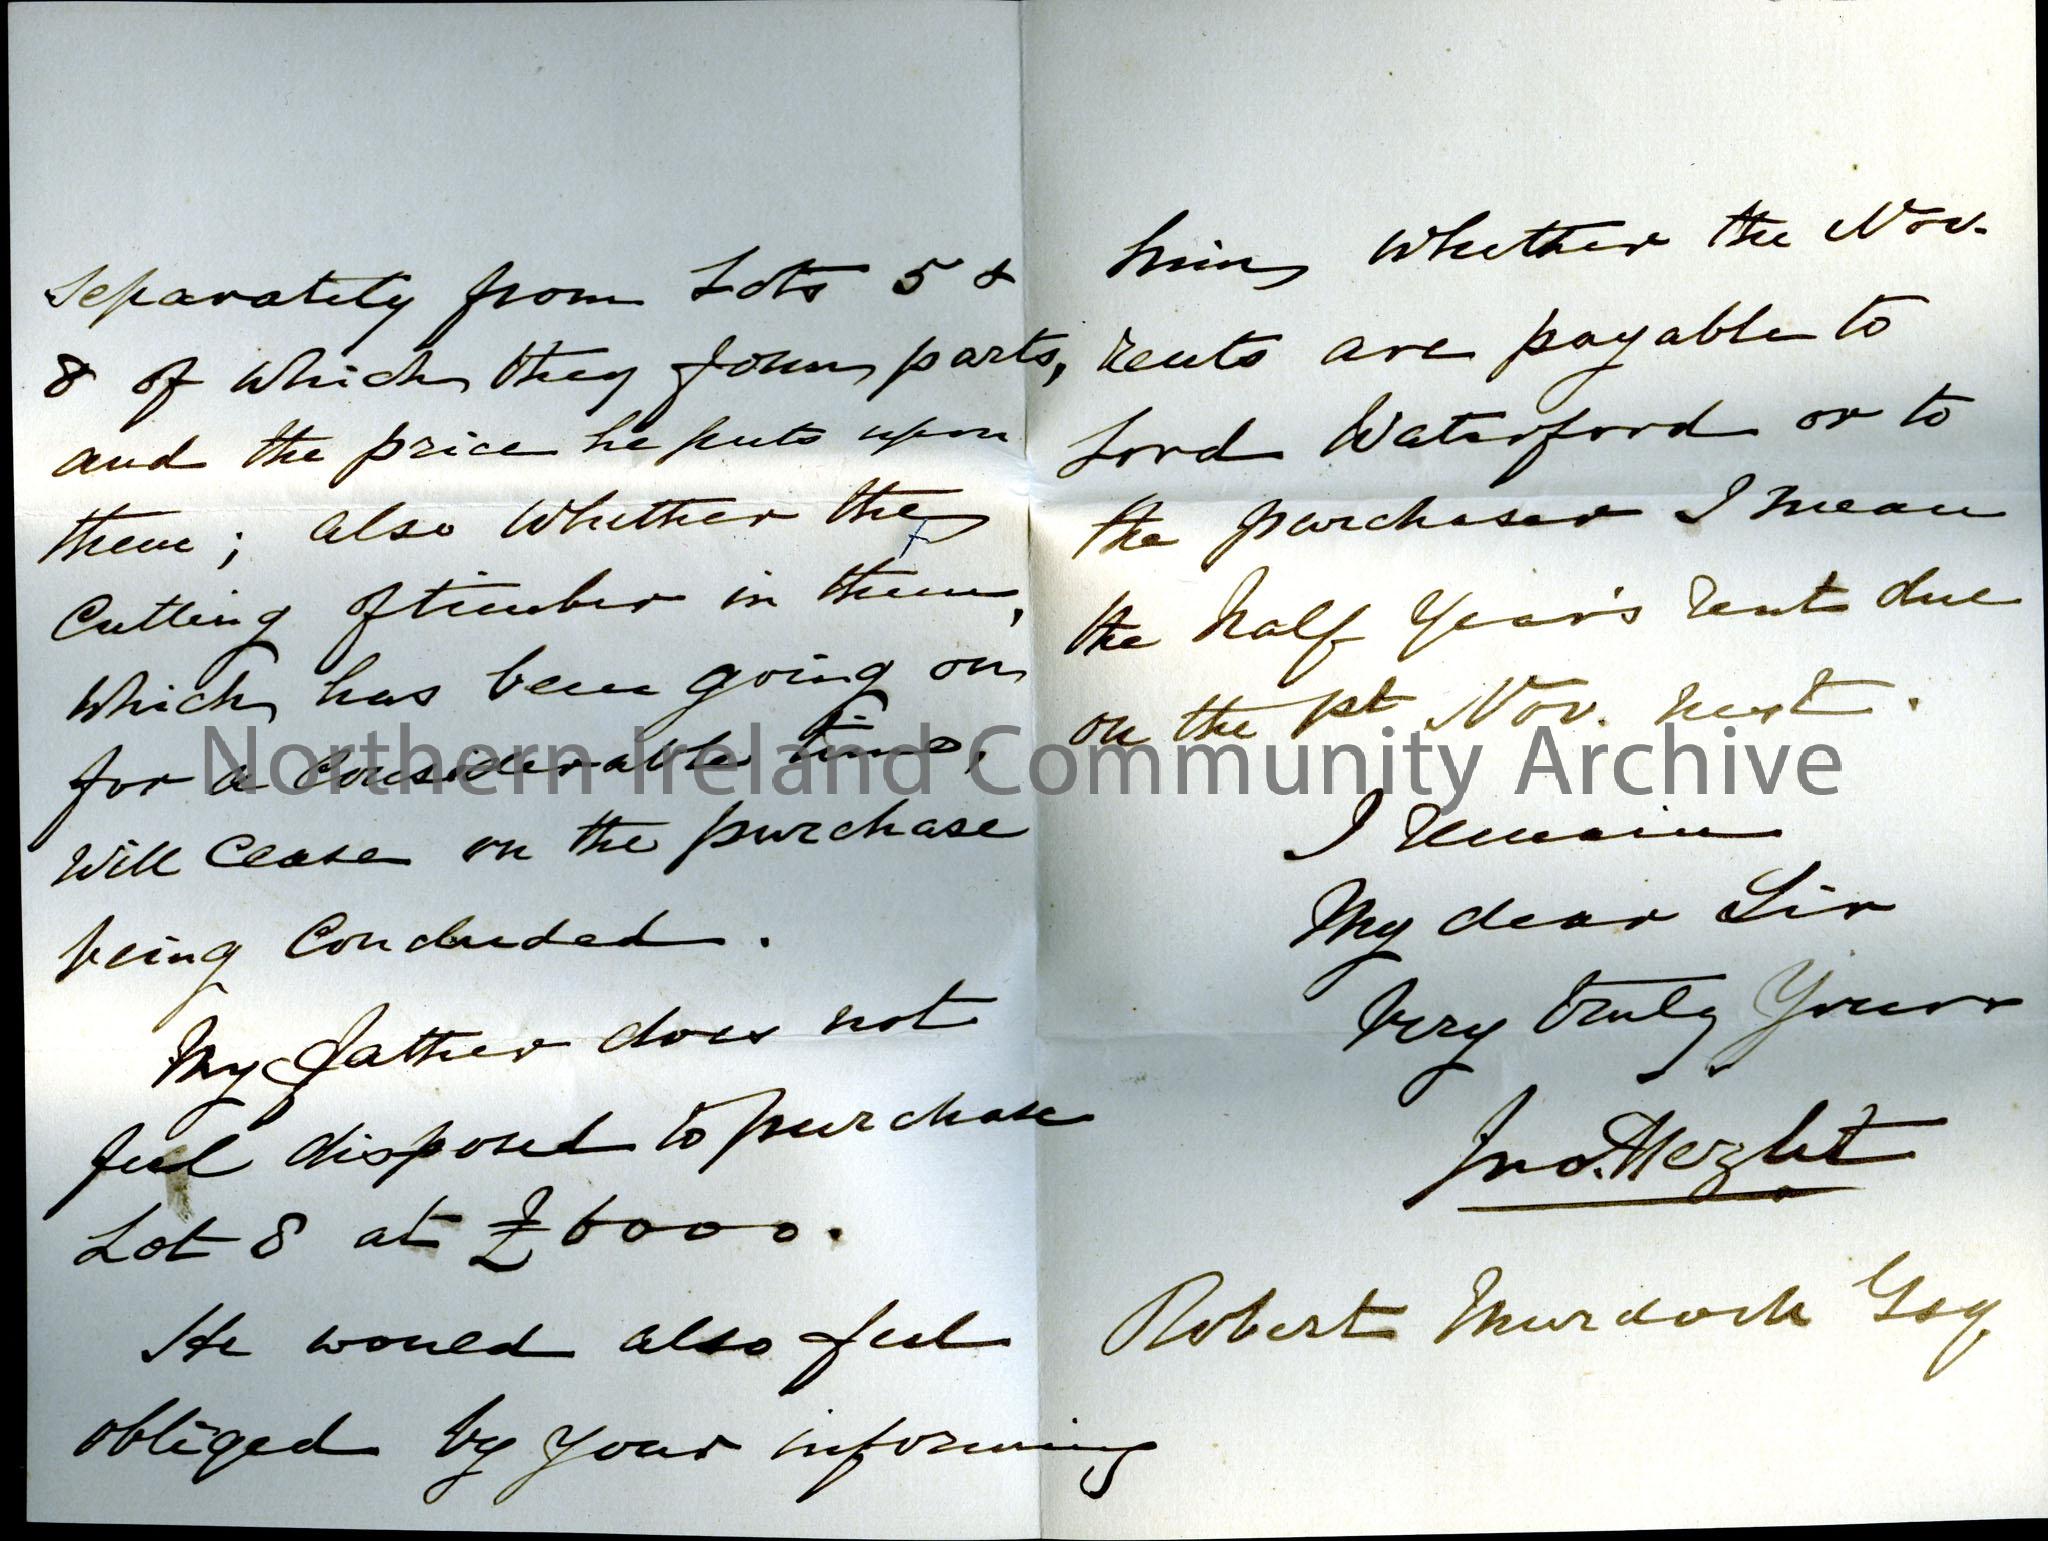 Handwritten letter from Mr. Hezlet to ‘Robert Murdoch Esq’ re. ‘the Waterford Estate’. Hezlet states that his father has instructed him to confirm his… – scan482c